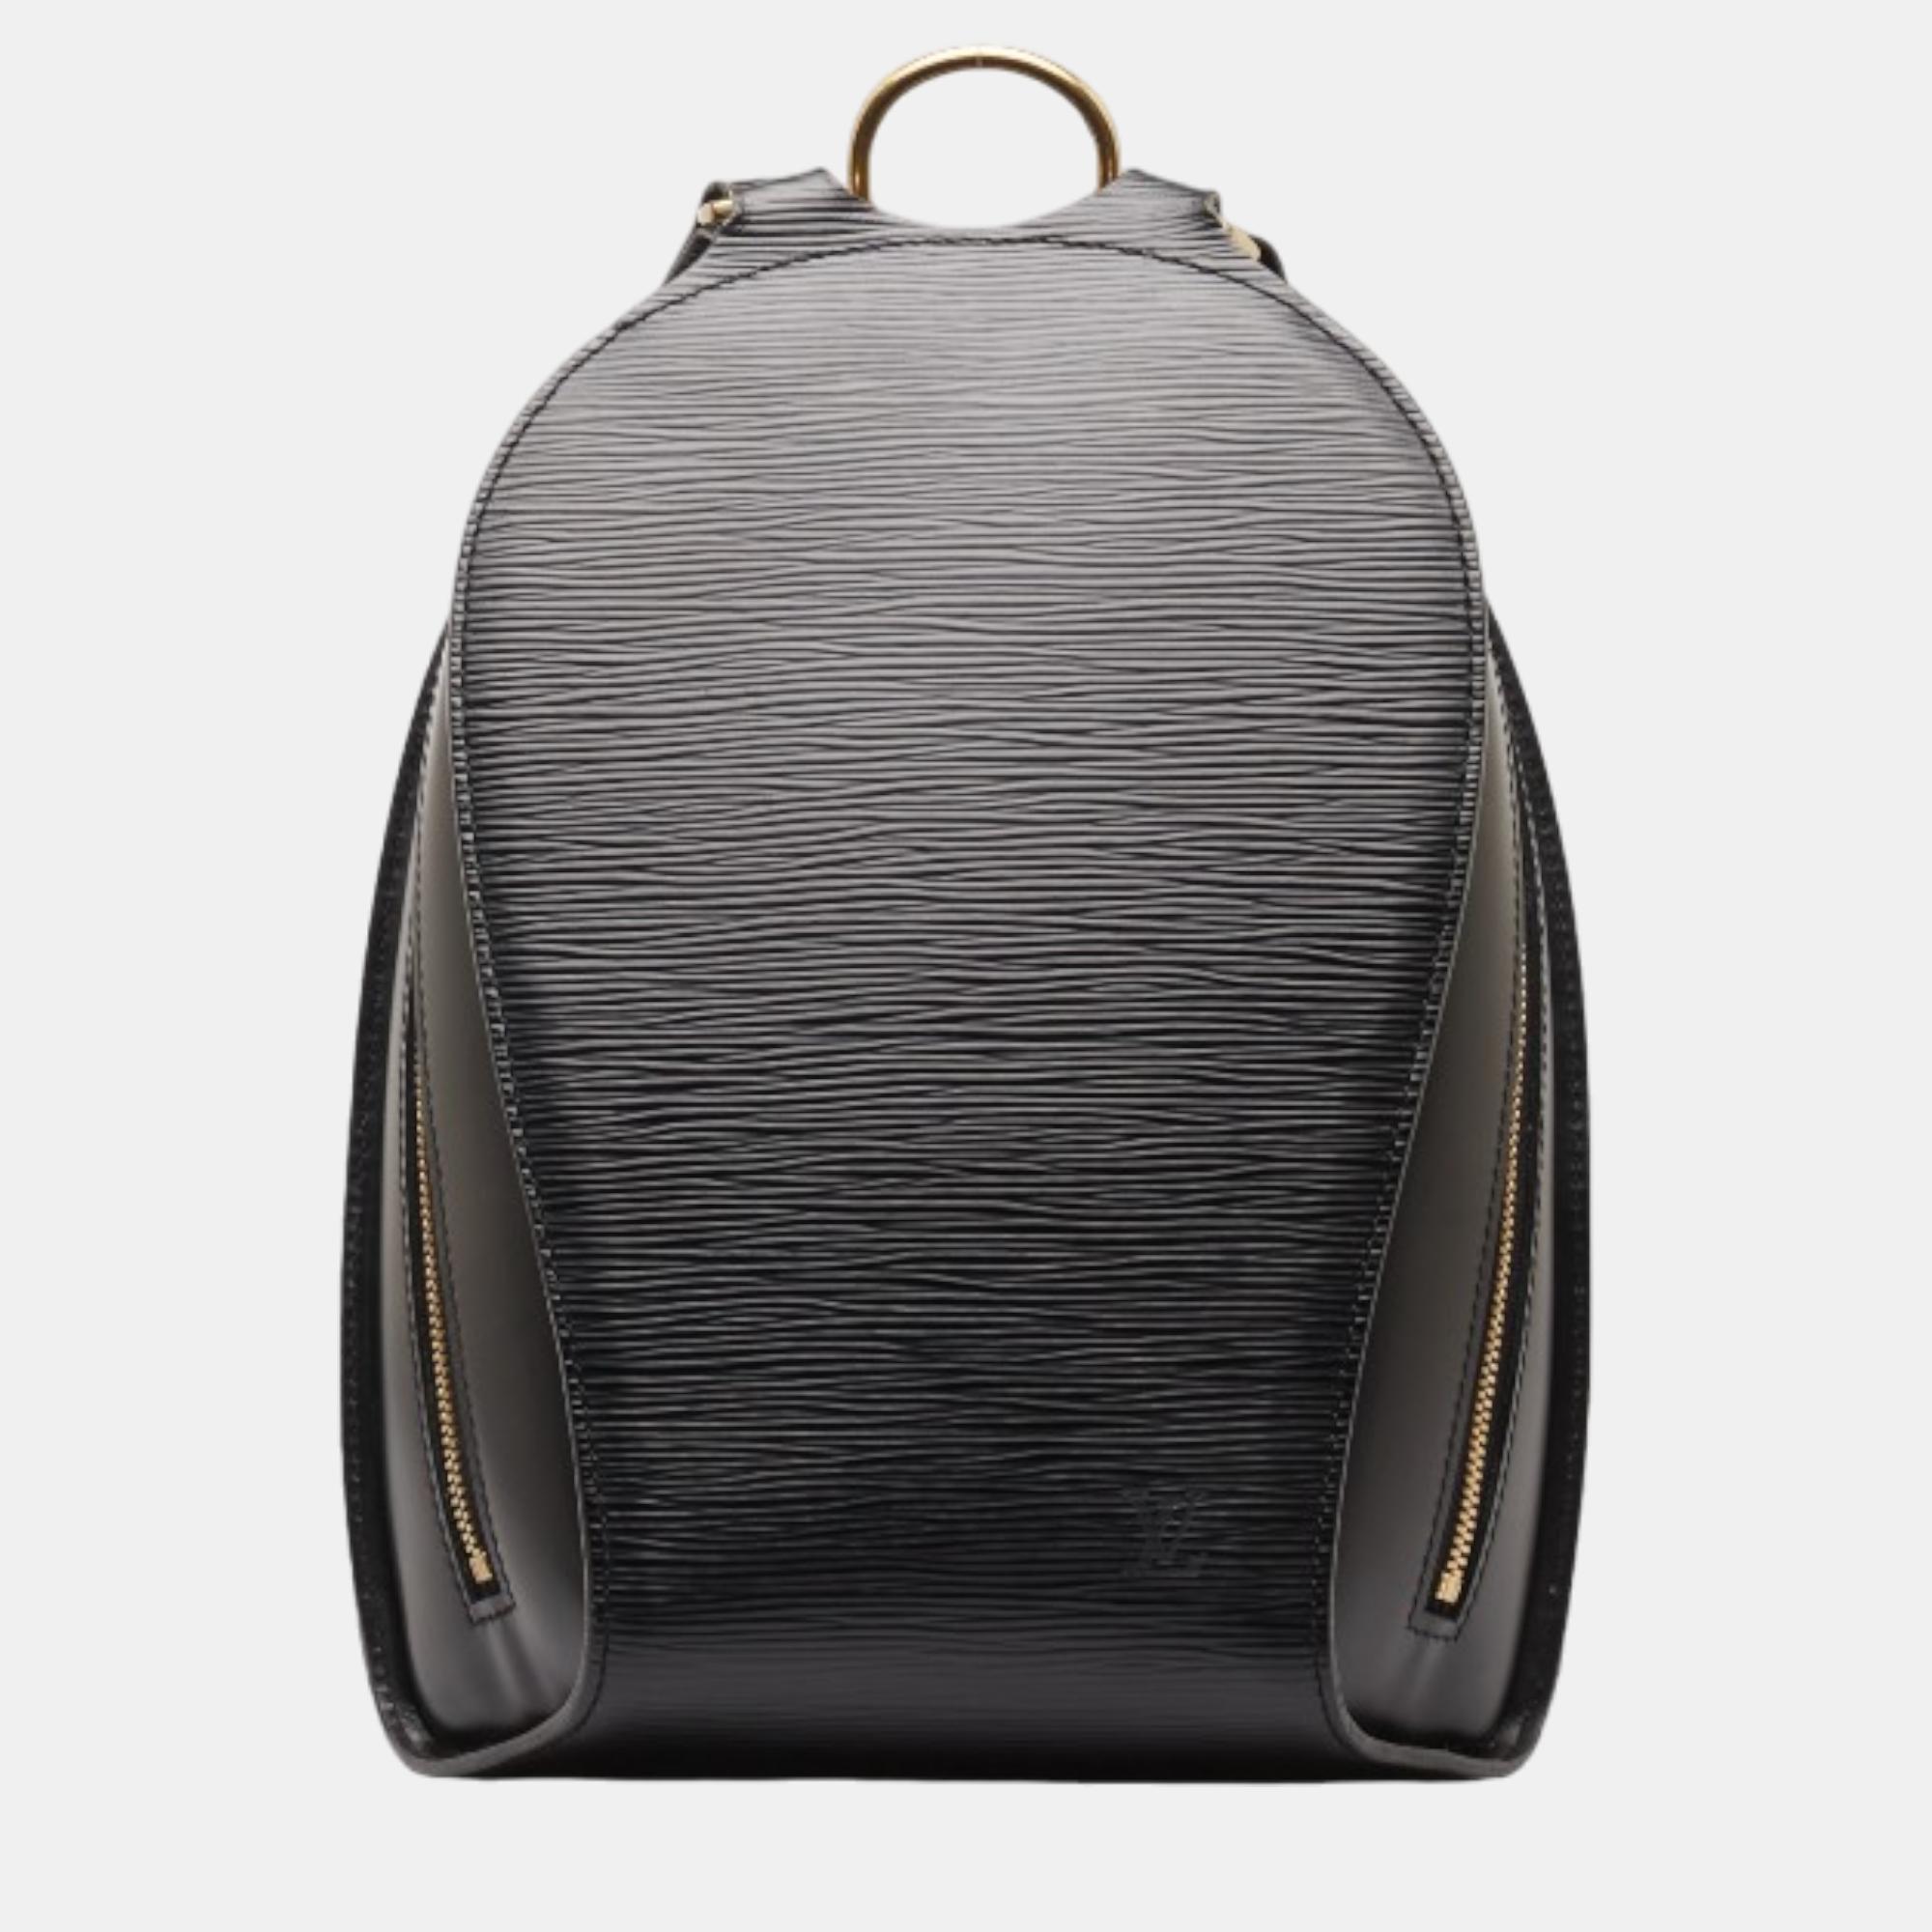 Louis vuitton black leather  mabillon backpack